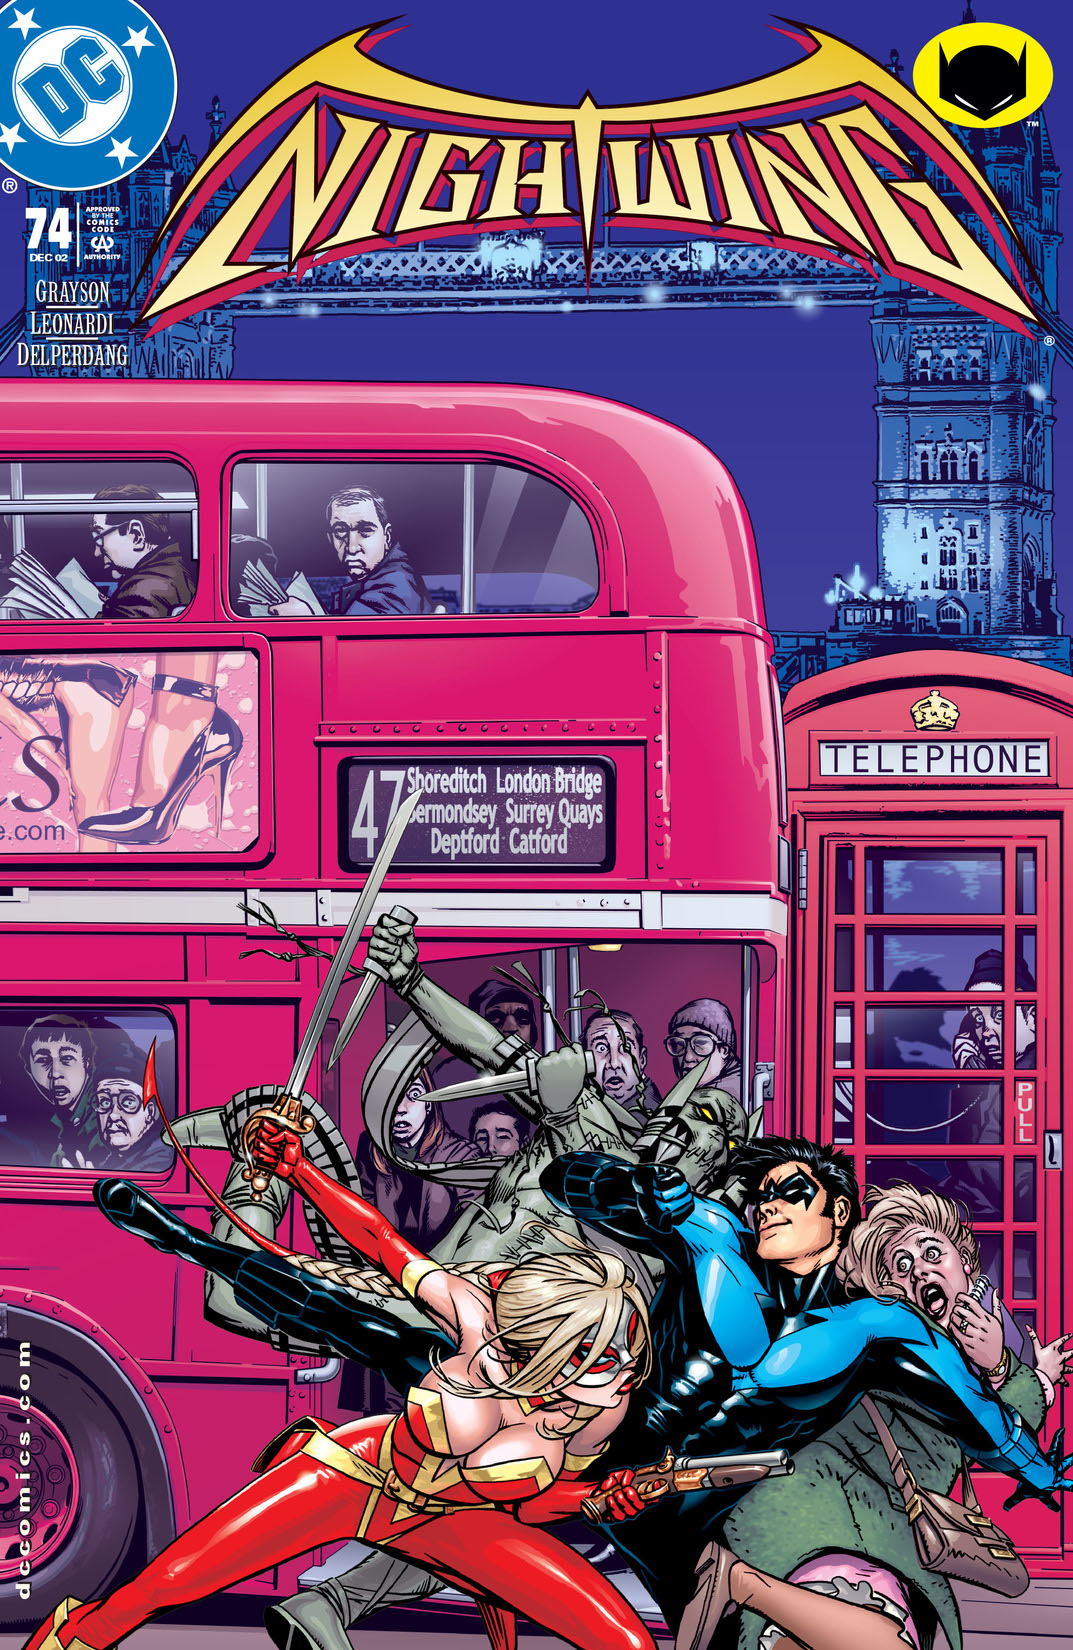 Nightwing (1996-) #74 preview images